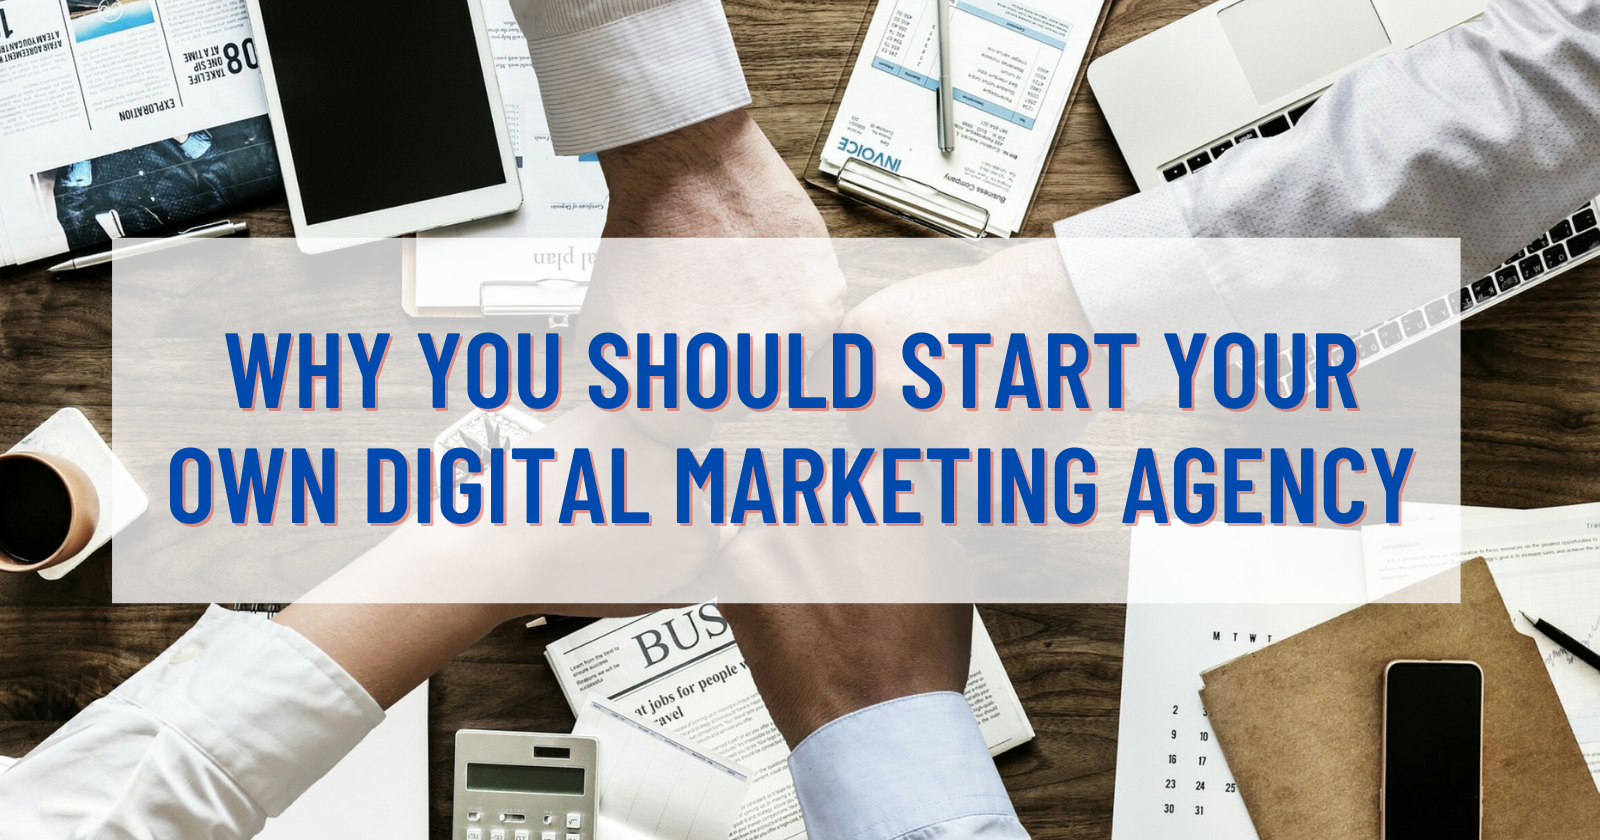 What is Start Your Own Digital Marketing Agency